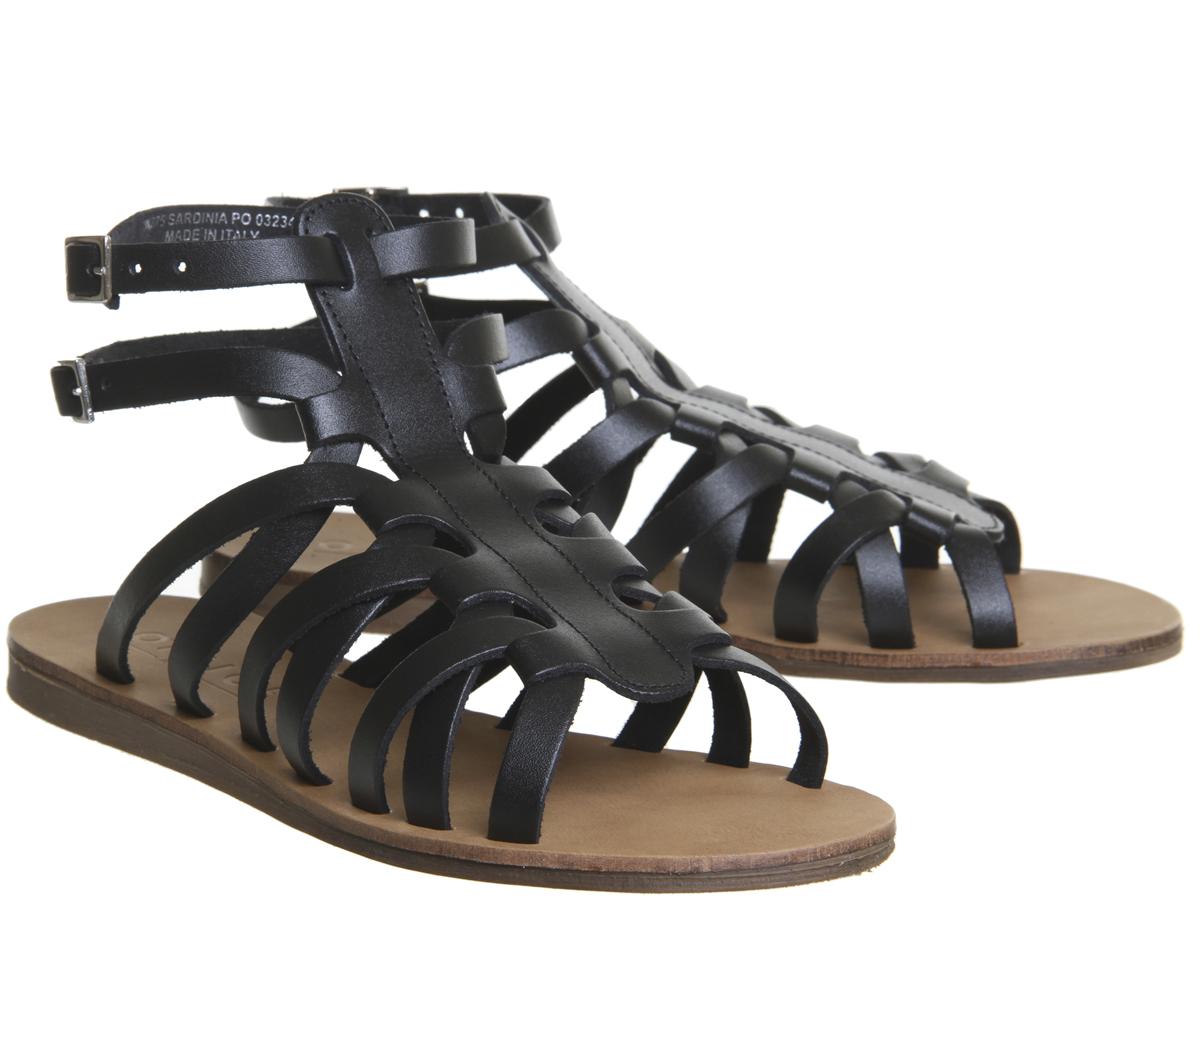 Office Sardinia Gladiator Sandals Black Leather Natural Sole - Women’s ...